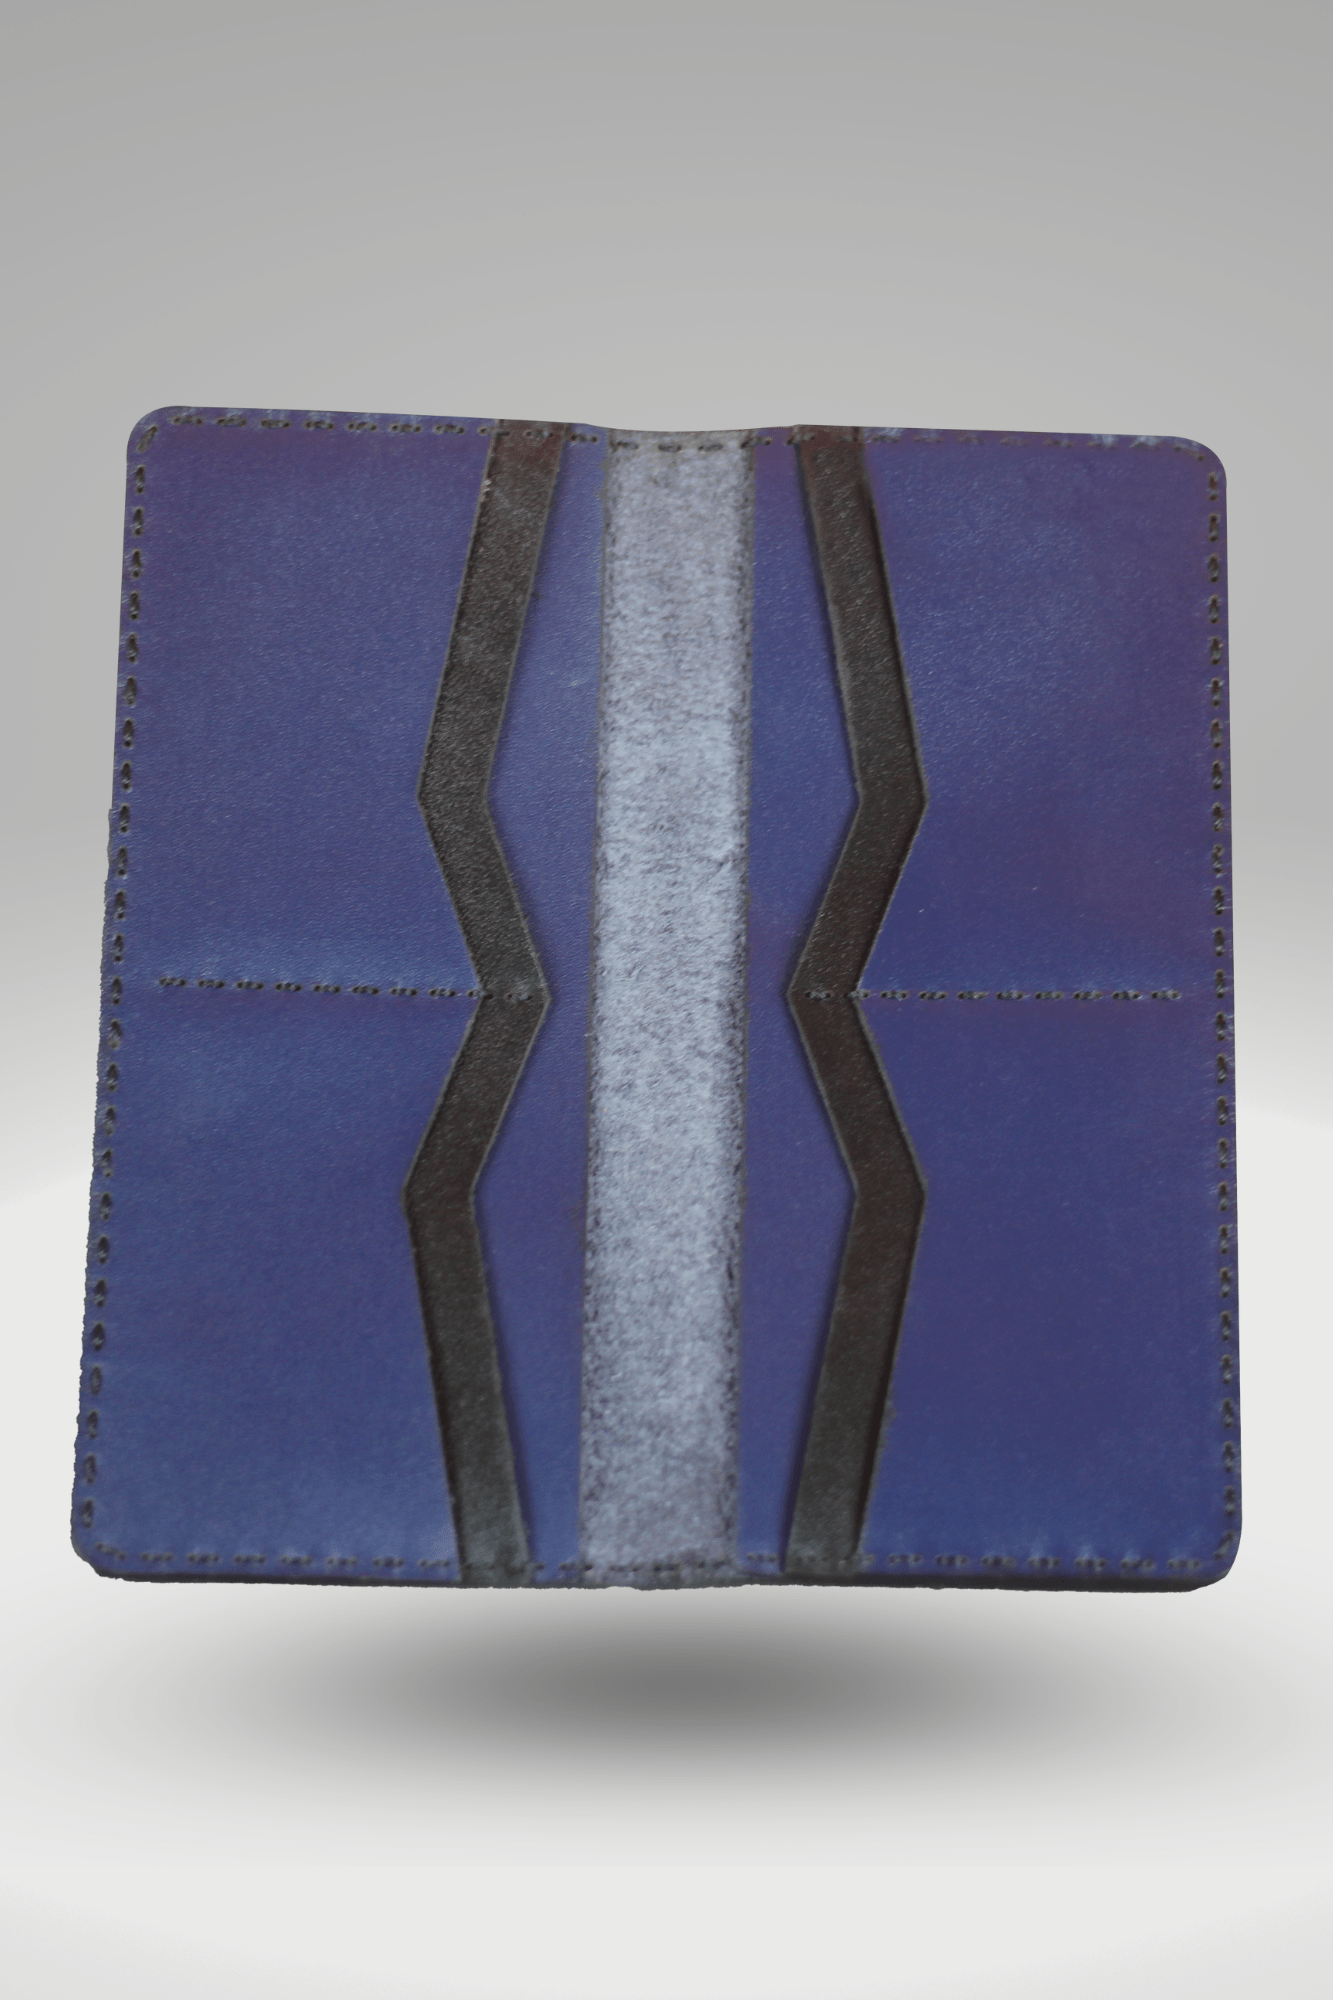 Unisex Soft Genuine Cowhide Leather Wallet In Royal Blue